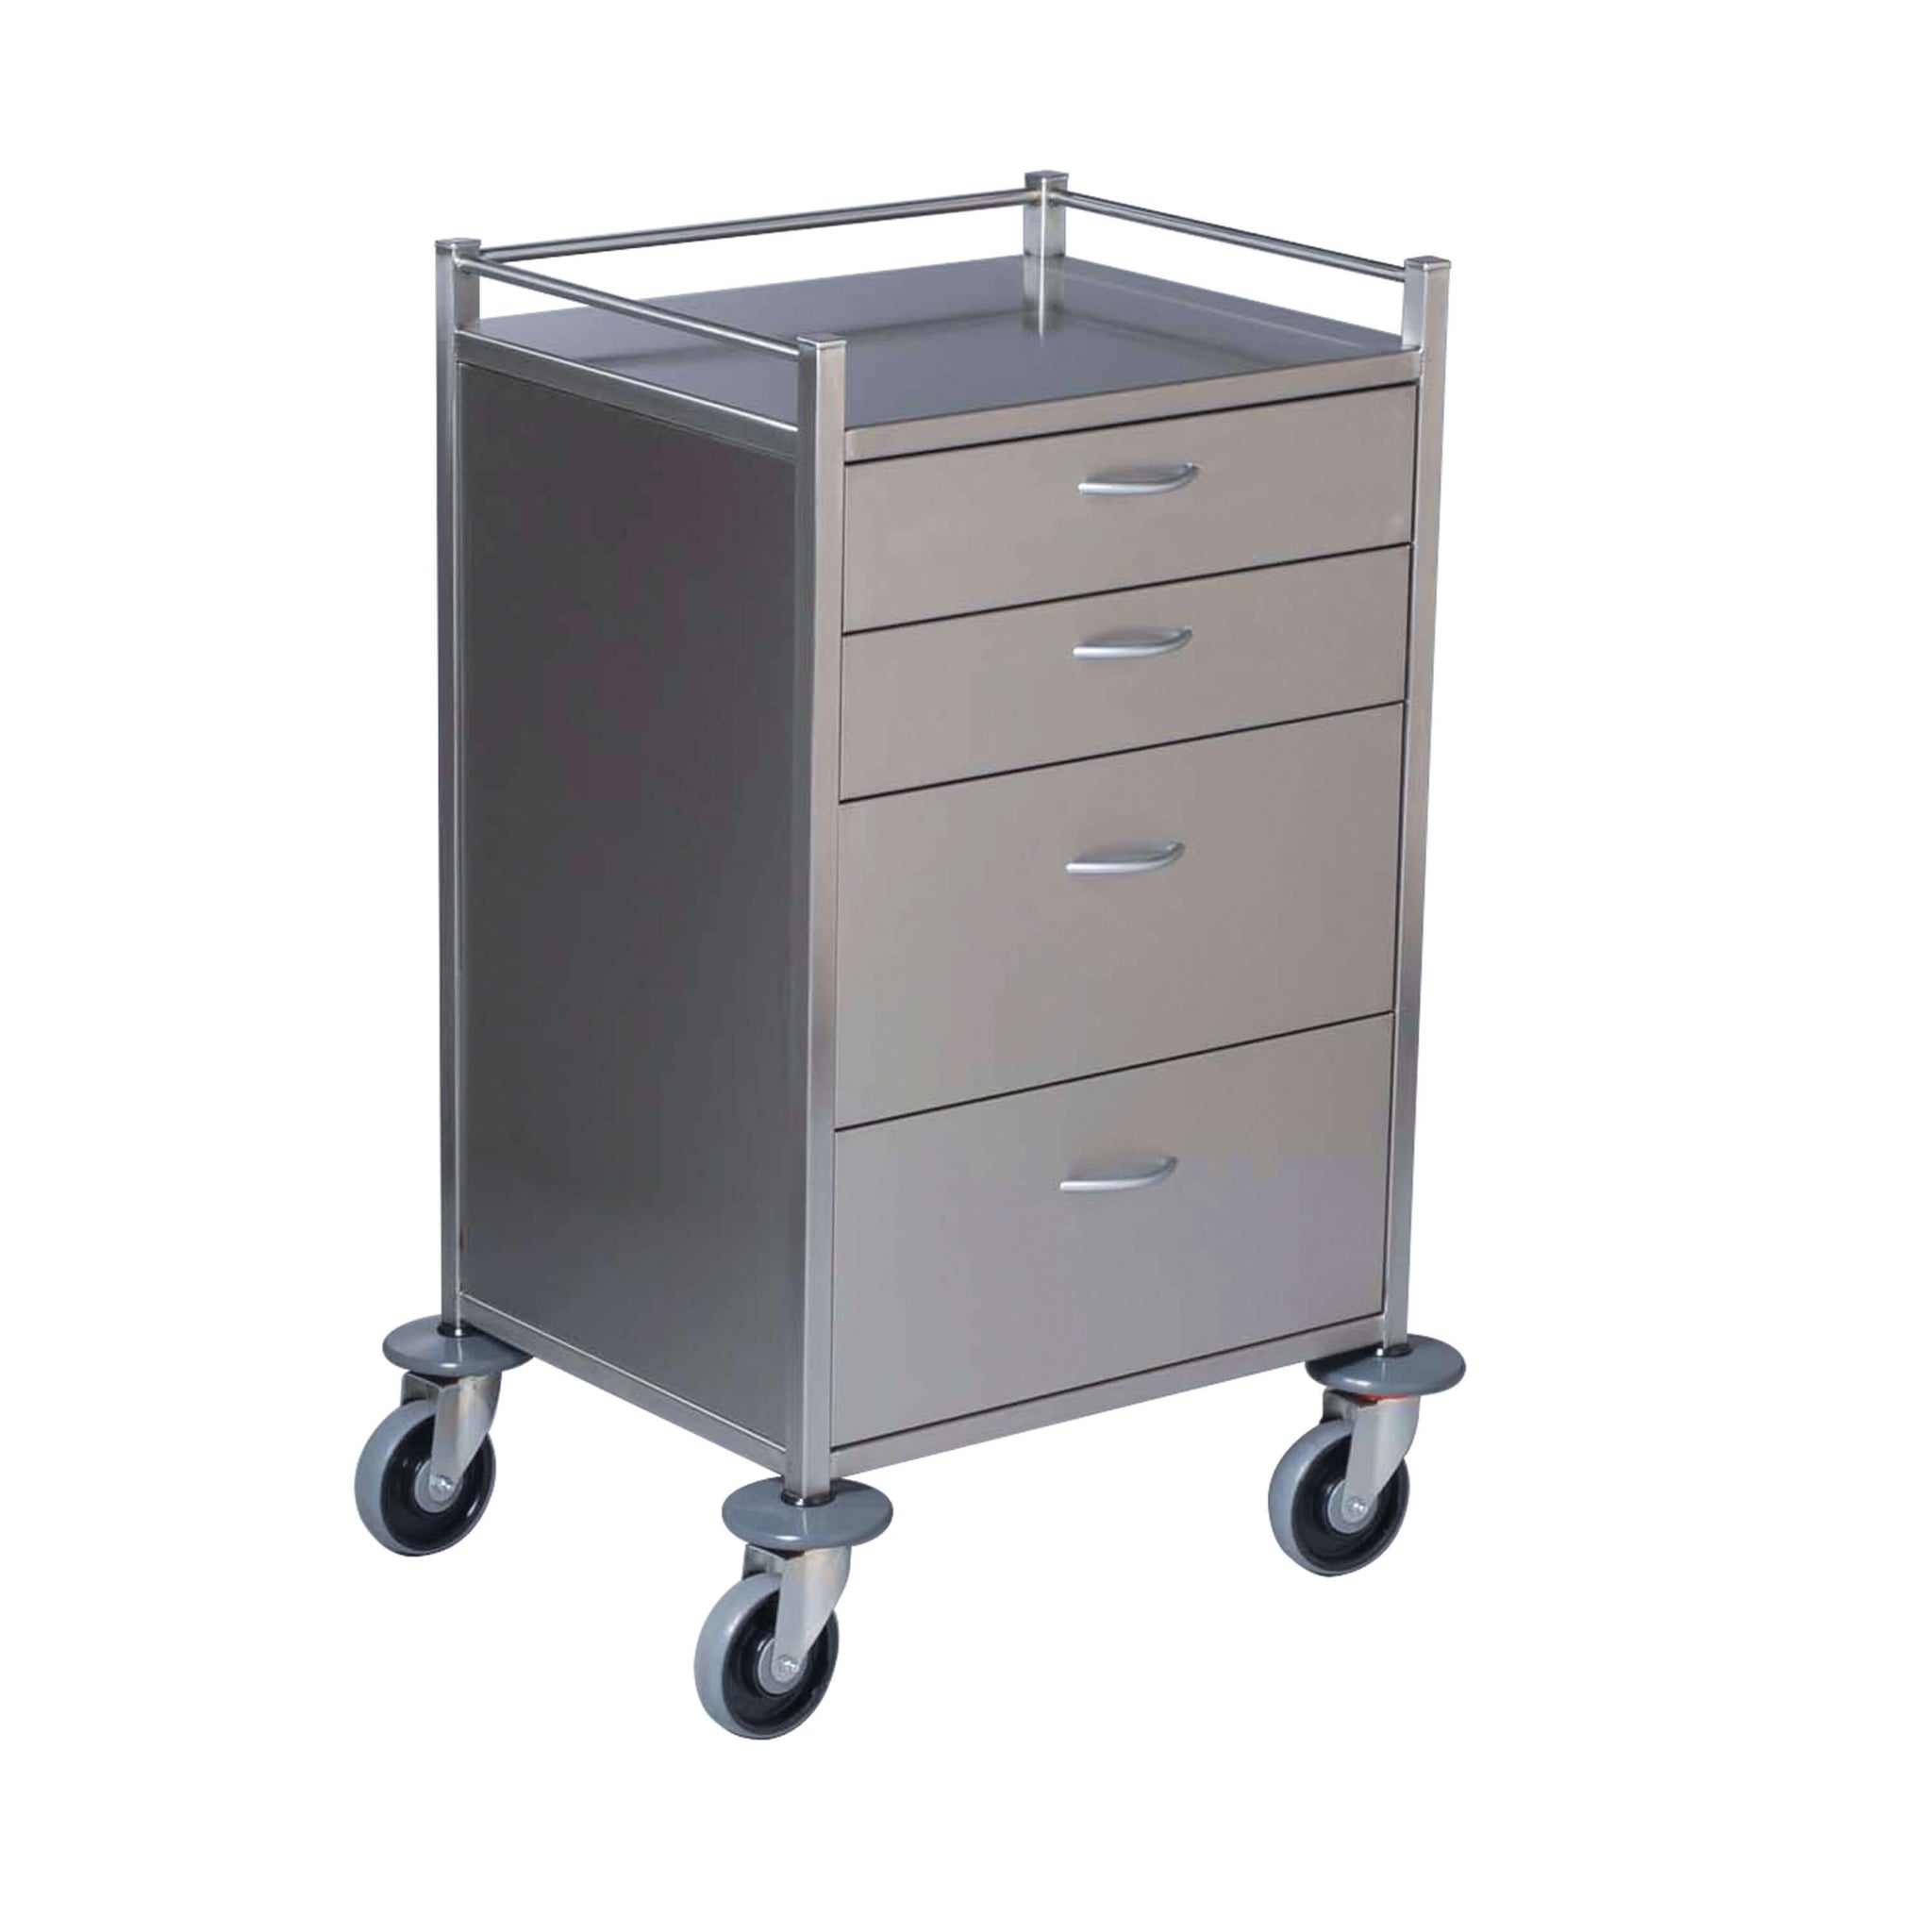 Anaesthetic Trolley - 4 Drawer, 600 X 490 X 1000 mm